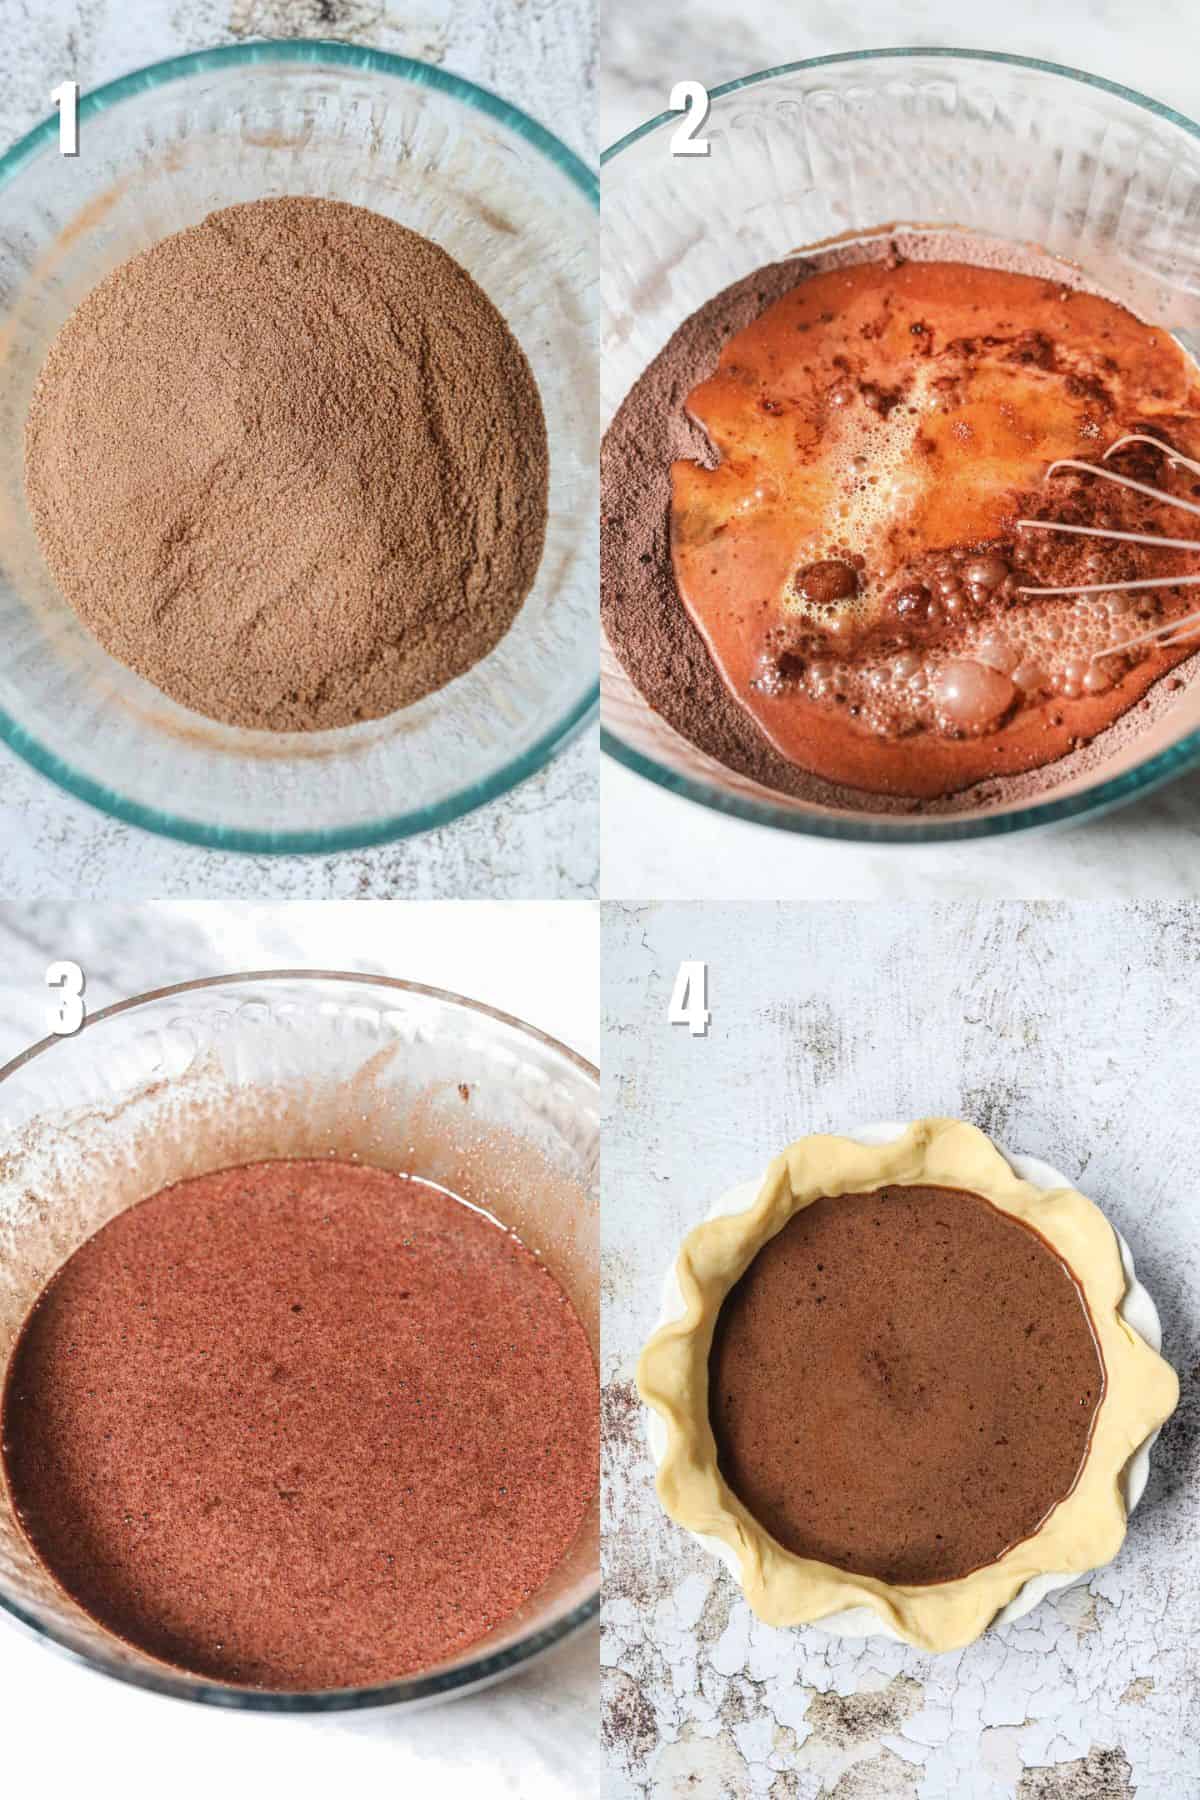 Step by step images for making chocolate chess pie.